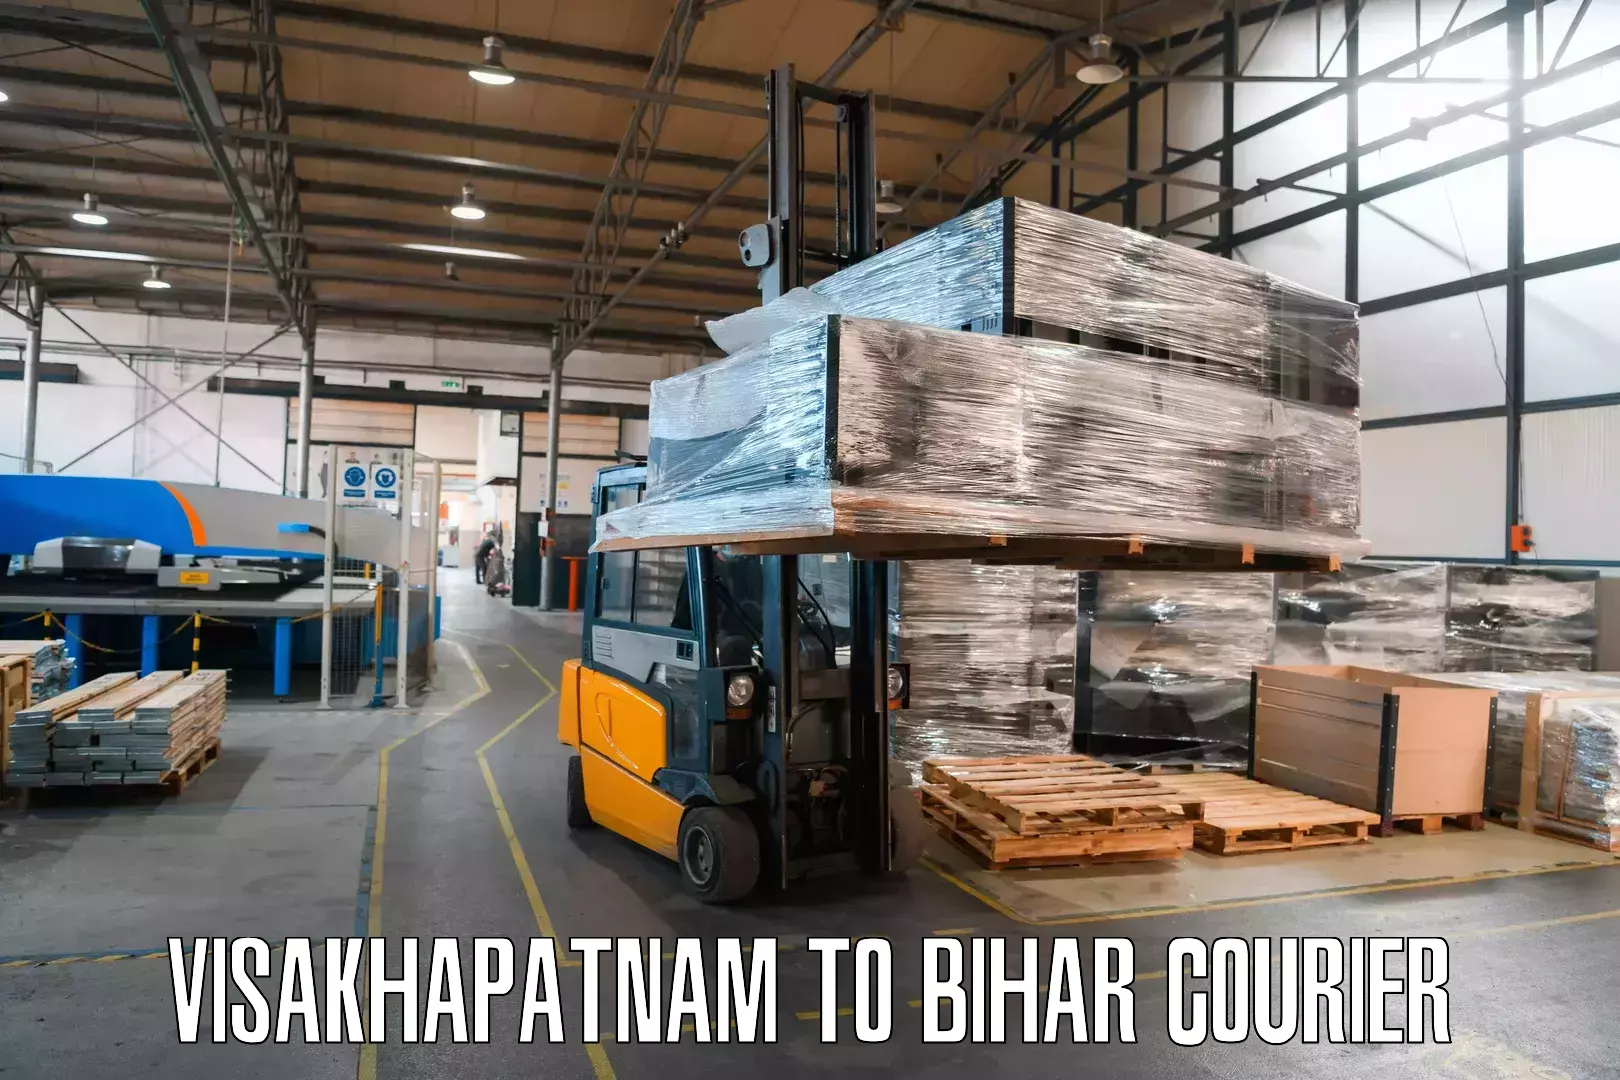 Package delivery network Visakhapatnam to Barhiya